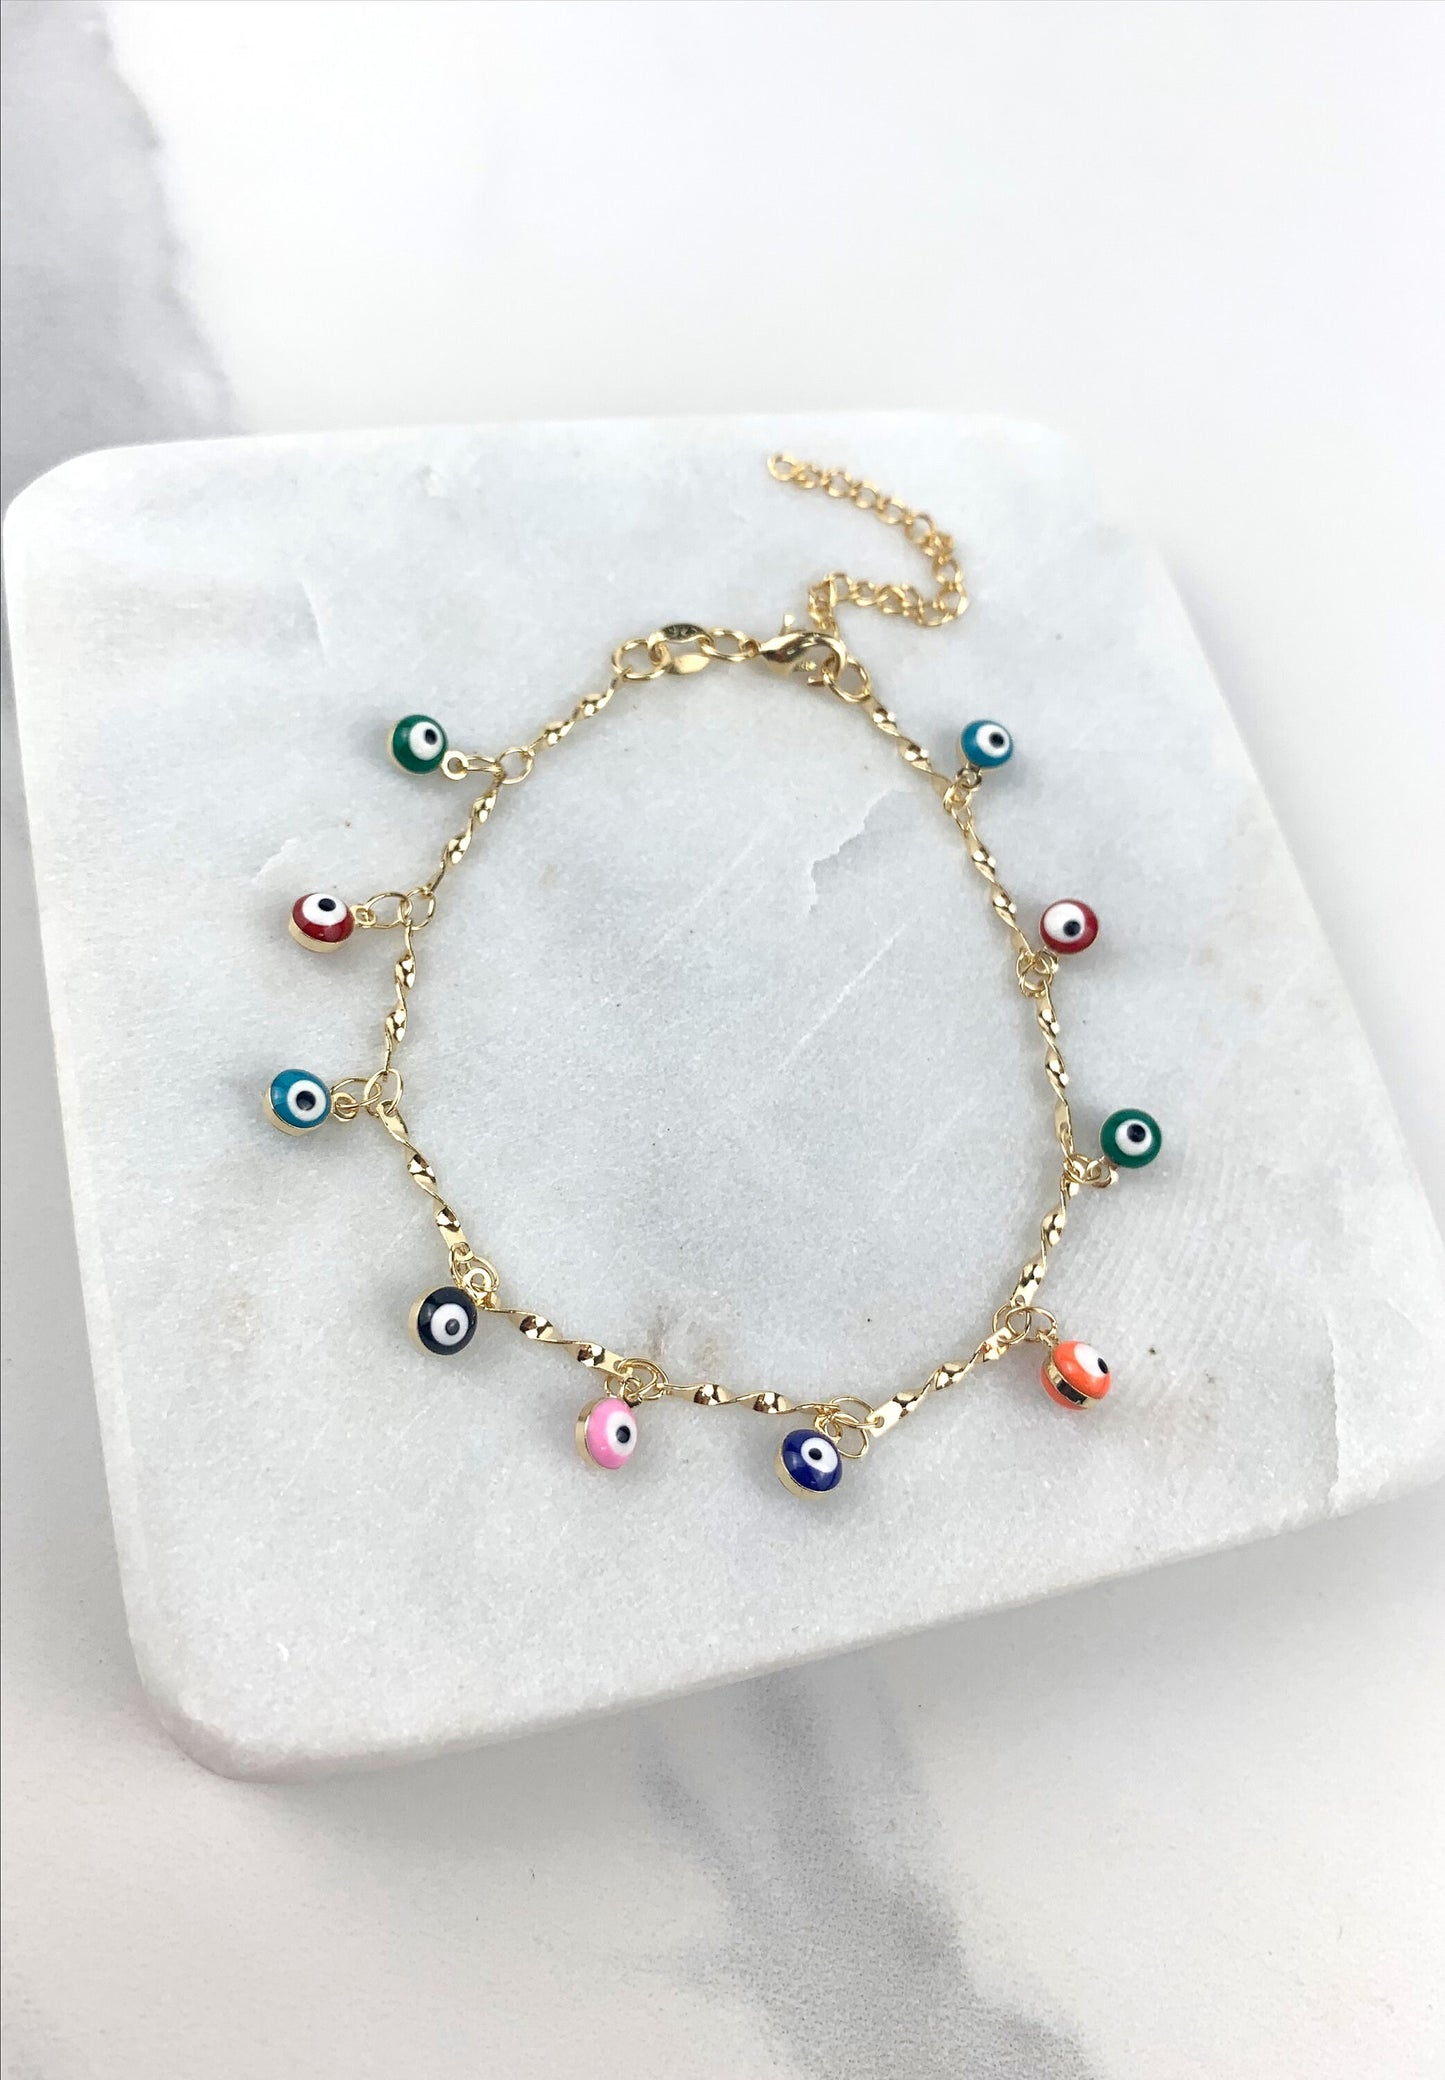 18k Gold Filled Colorful Evil Eye Charm Bracelet Multicolor Greek Eye Charms Wholesale Jewelry Making Supplies